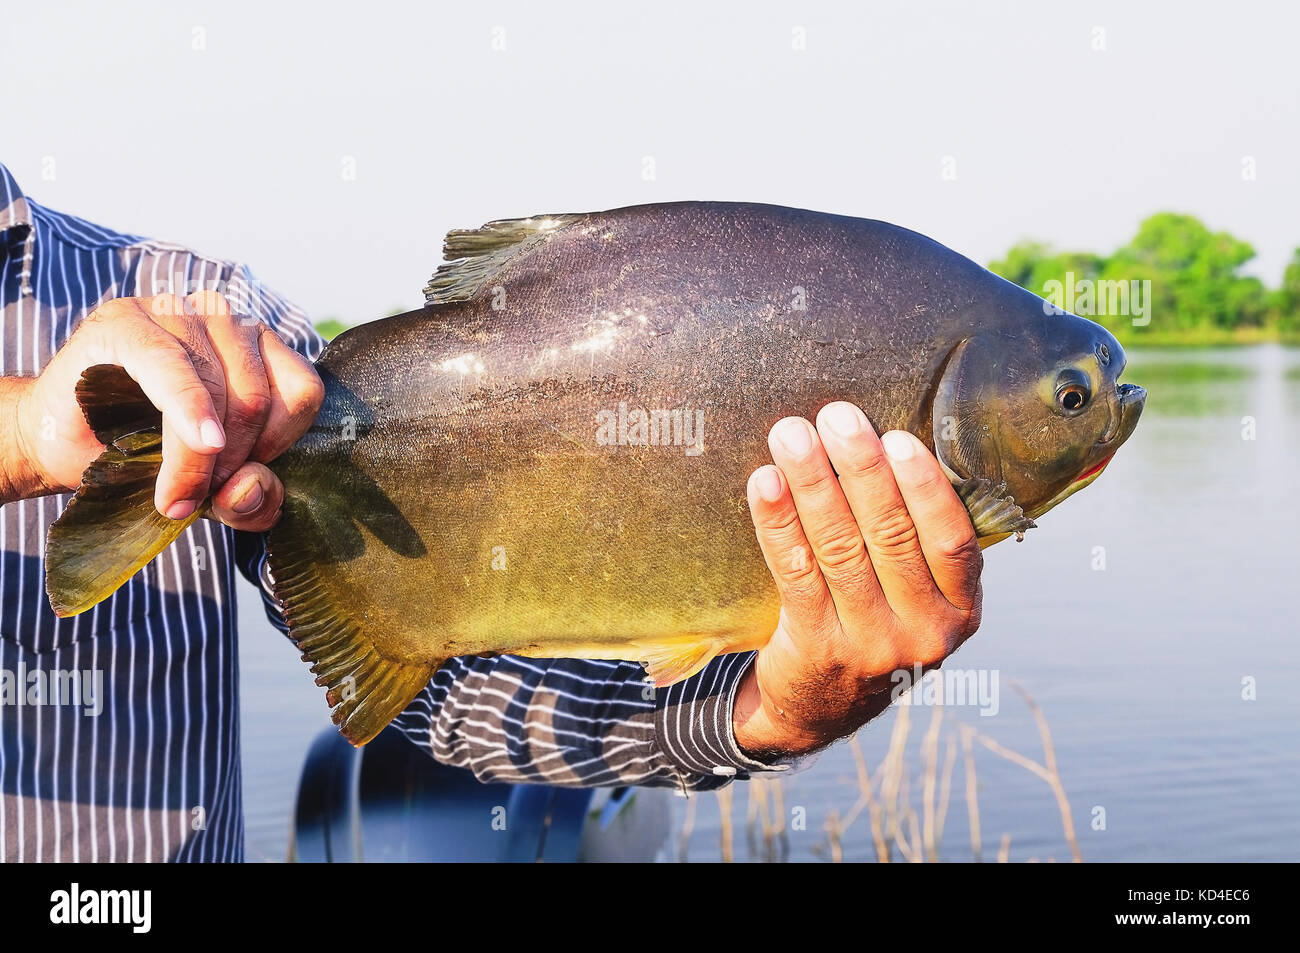 Hands of a fisherman holding a fish known as Pacu. Photo taken in Pantanal, Brazil. Stock Photo